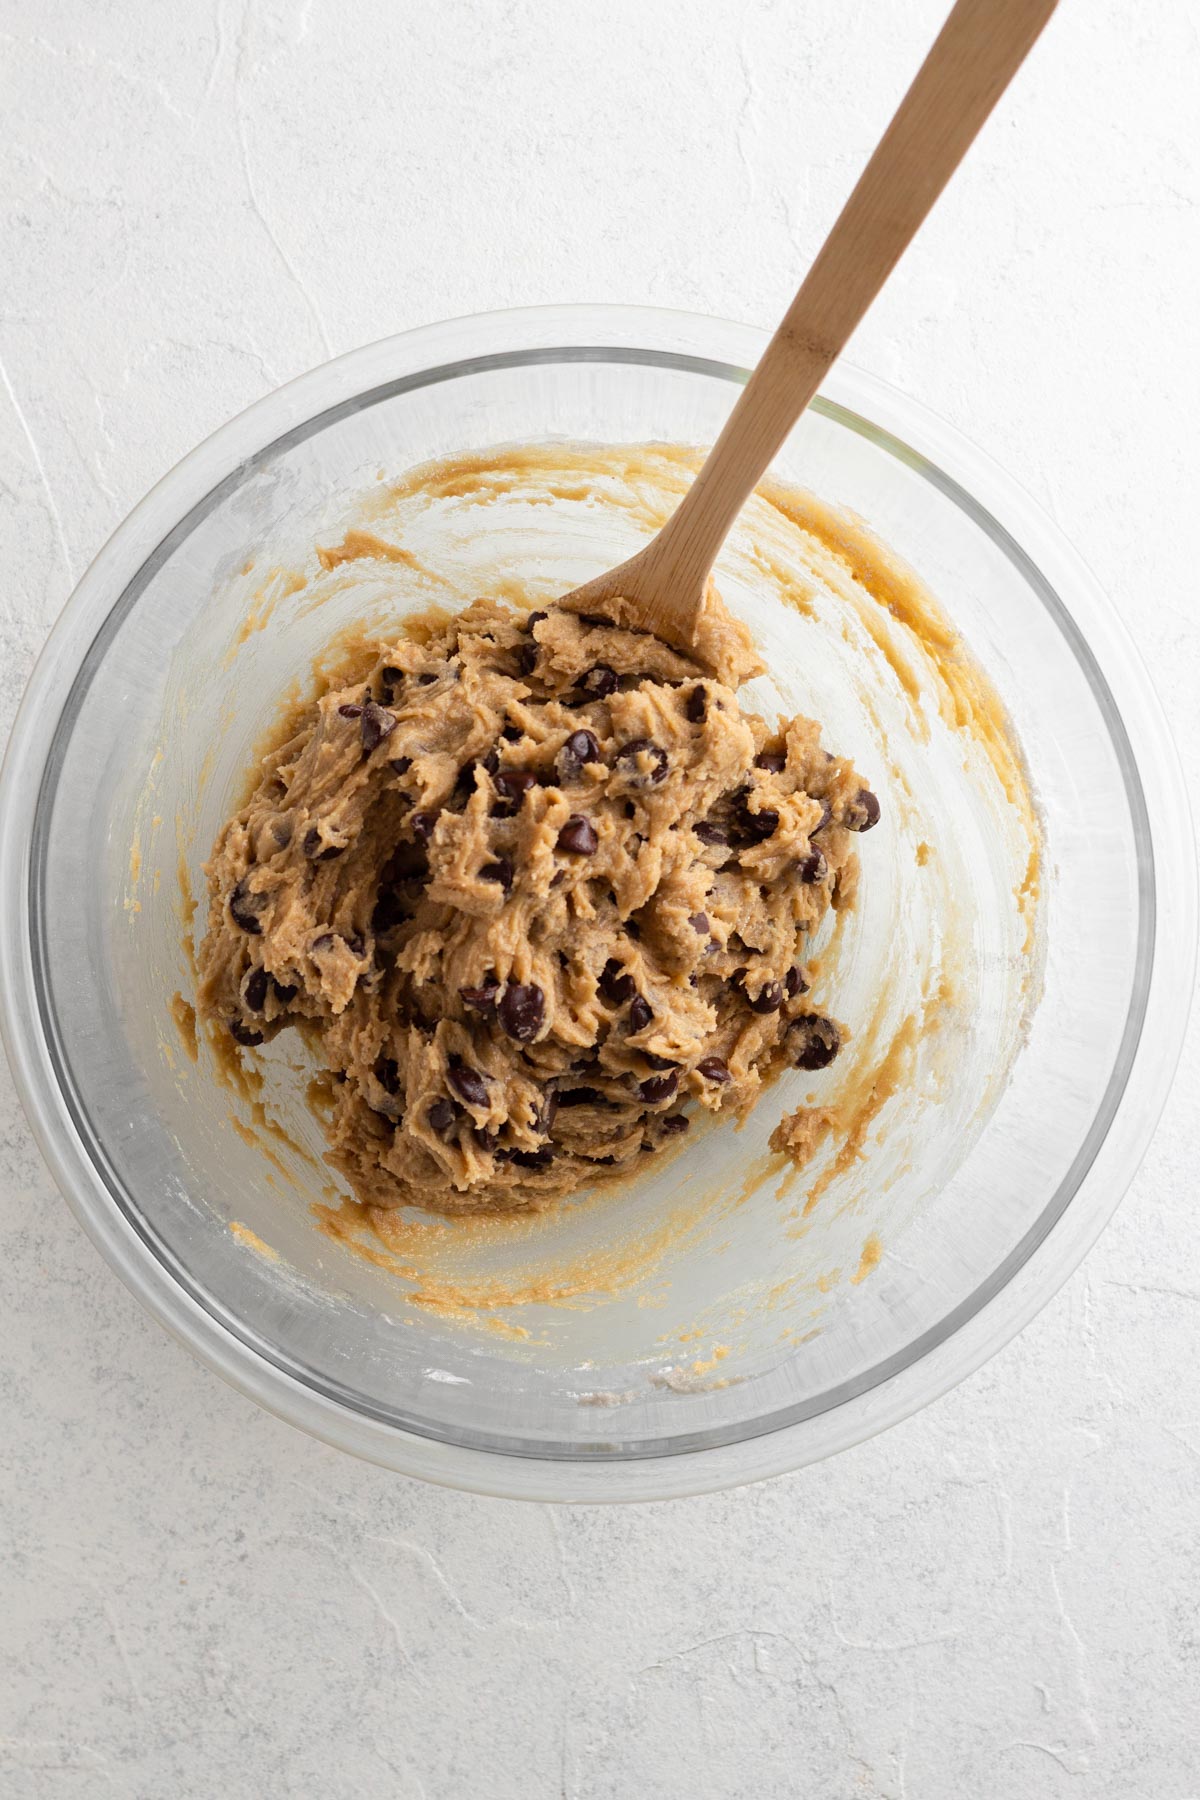 Cookie dough with chocolate chips in a glass mixing bowl with a wooden spoon.